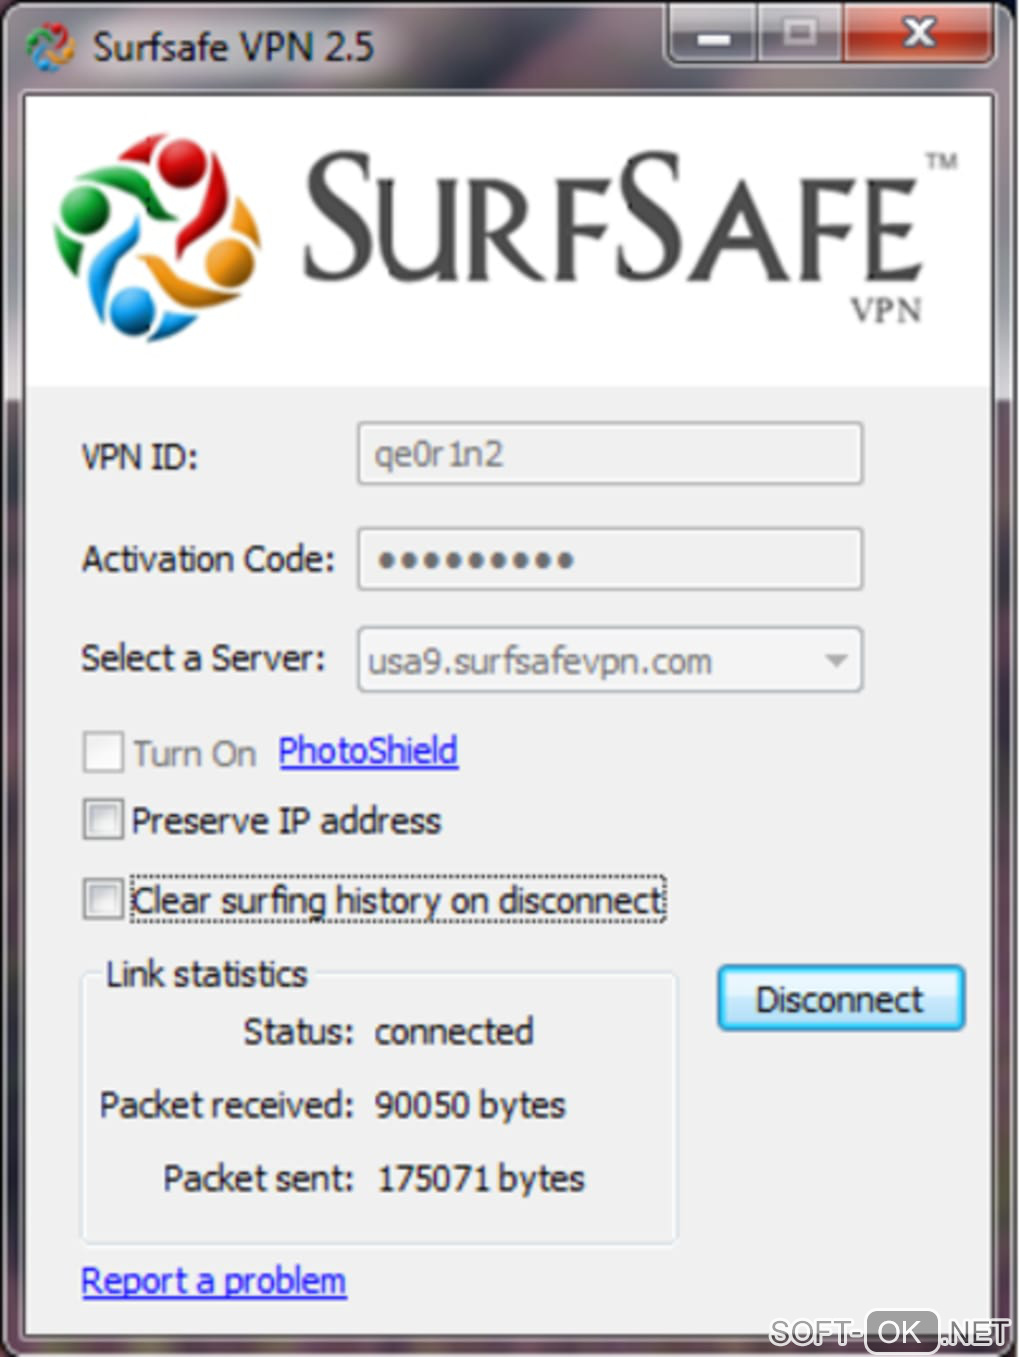 The appearance "SurfSafeVPN Free Trial"